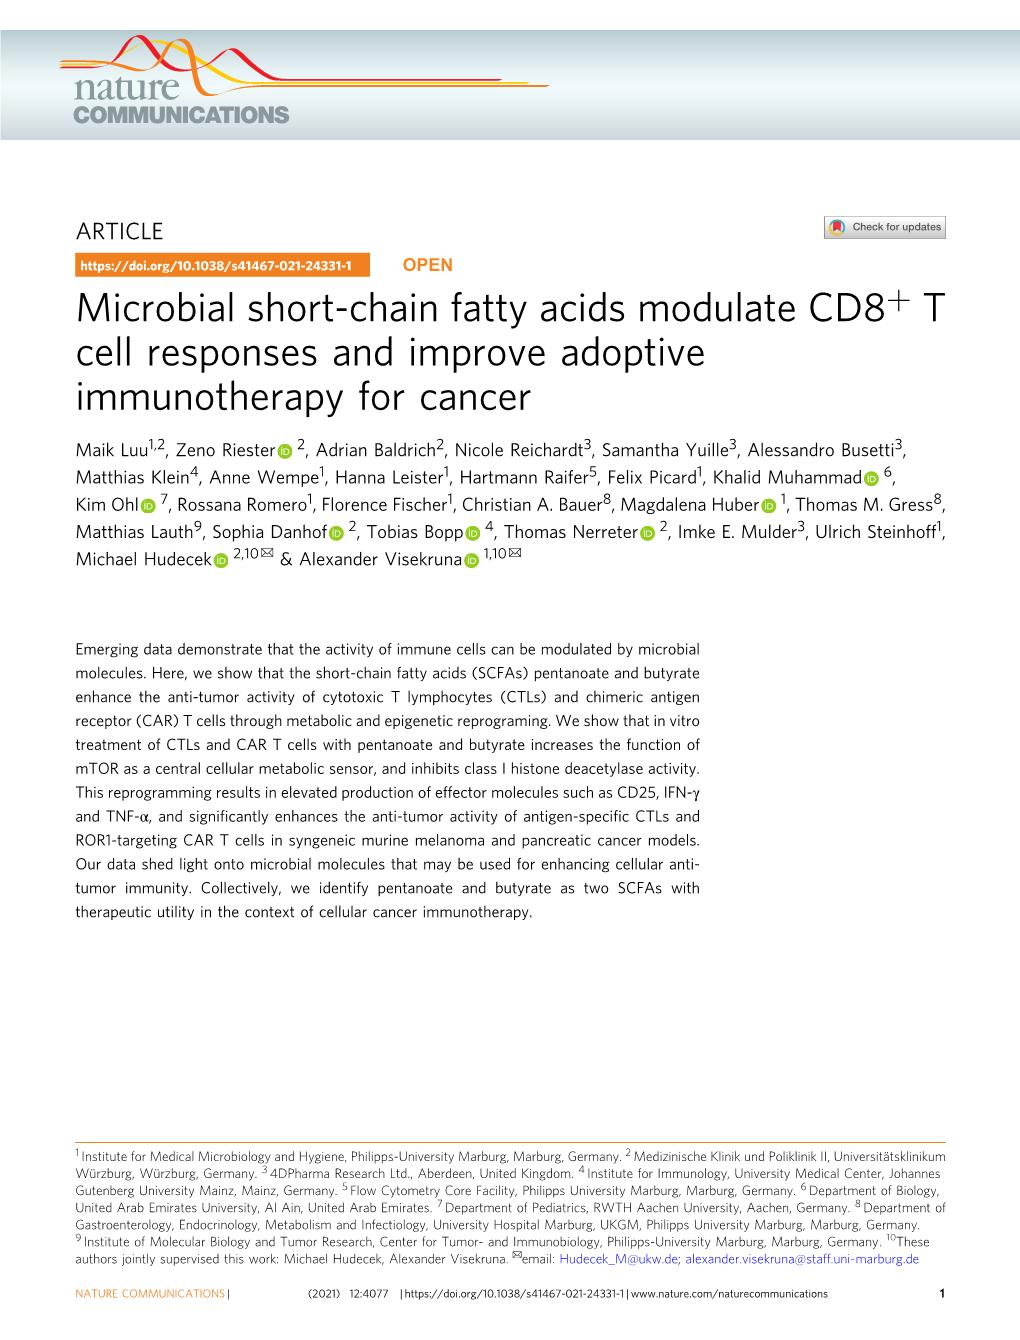 Microbial Short-Chain Fatty Acids Modulate CD8+ T Cell Responses and Improve Adoptive Immunotherapy for Cancer